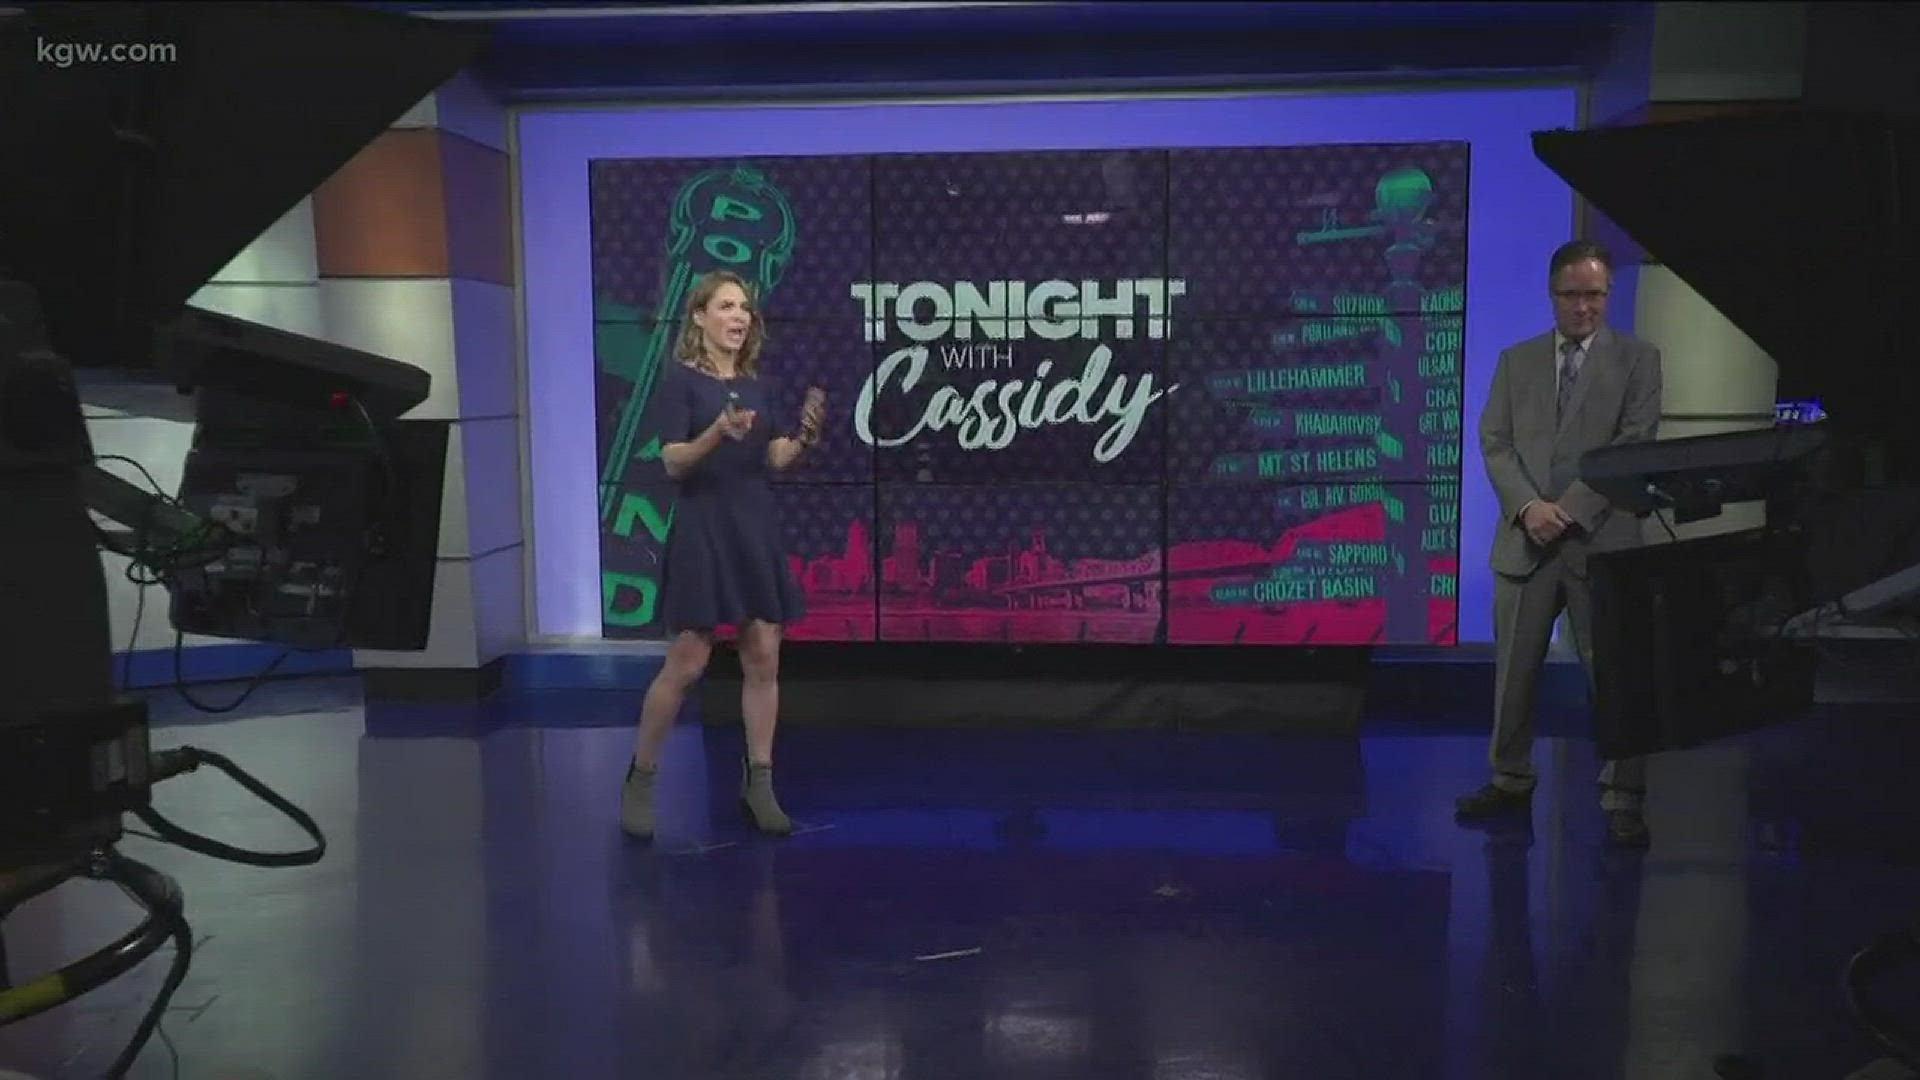 Matt Zaffino is back to talk about all of the latest weirdness in PDX.

#TonightwithCassidy